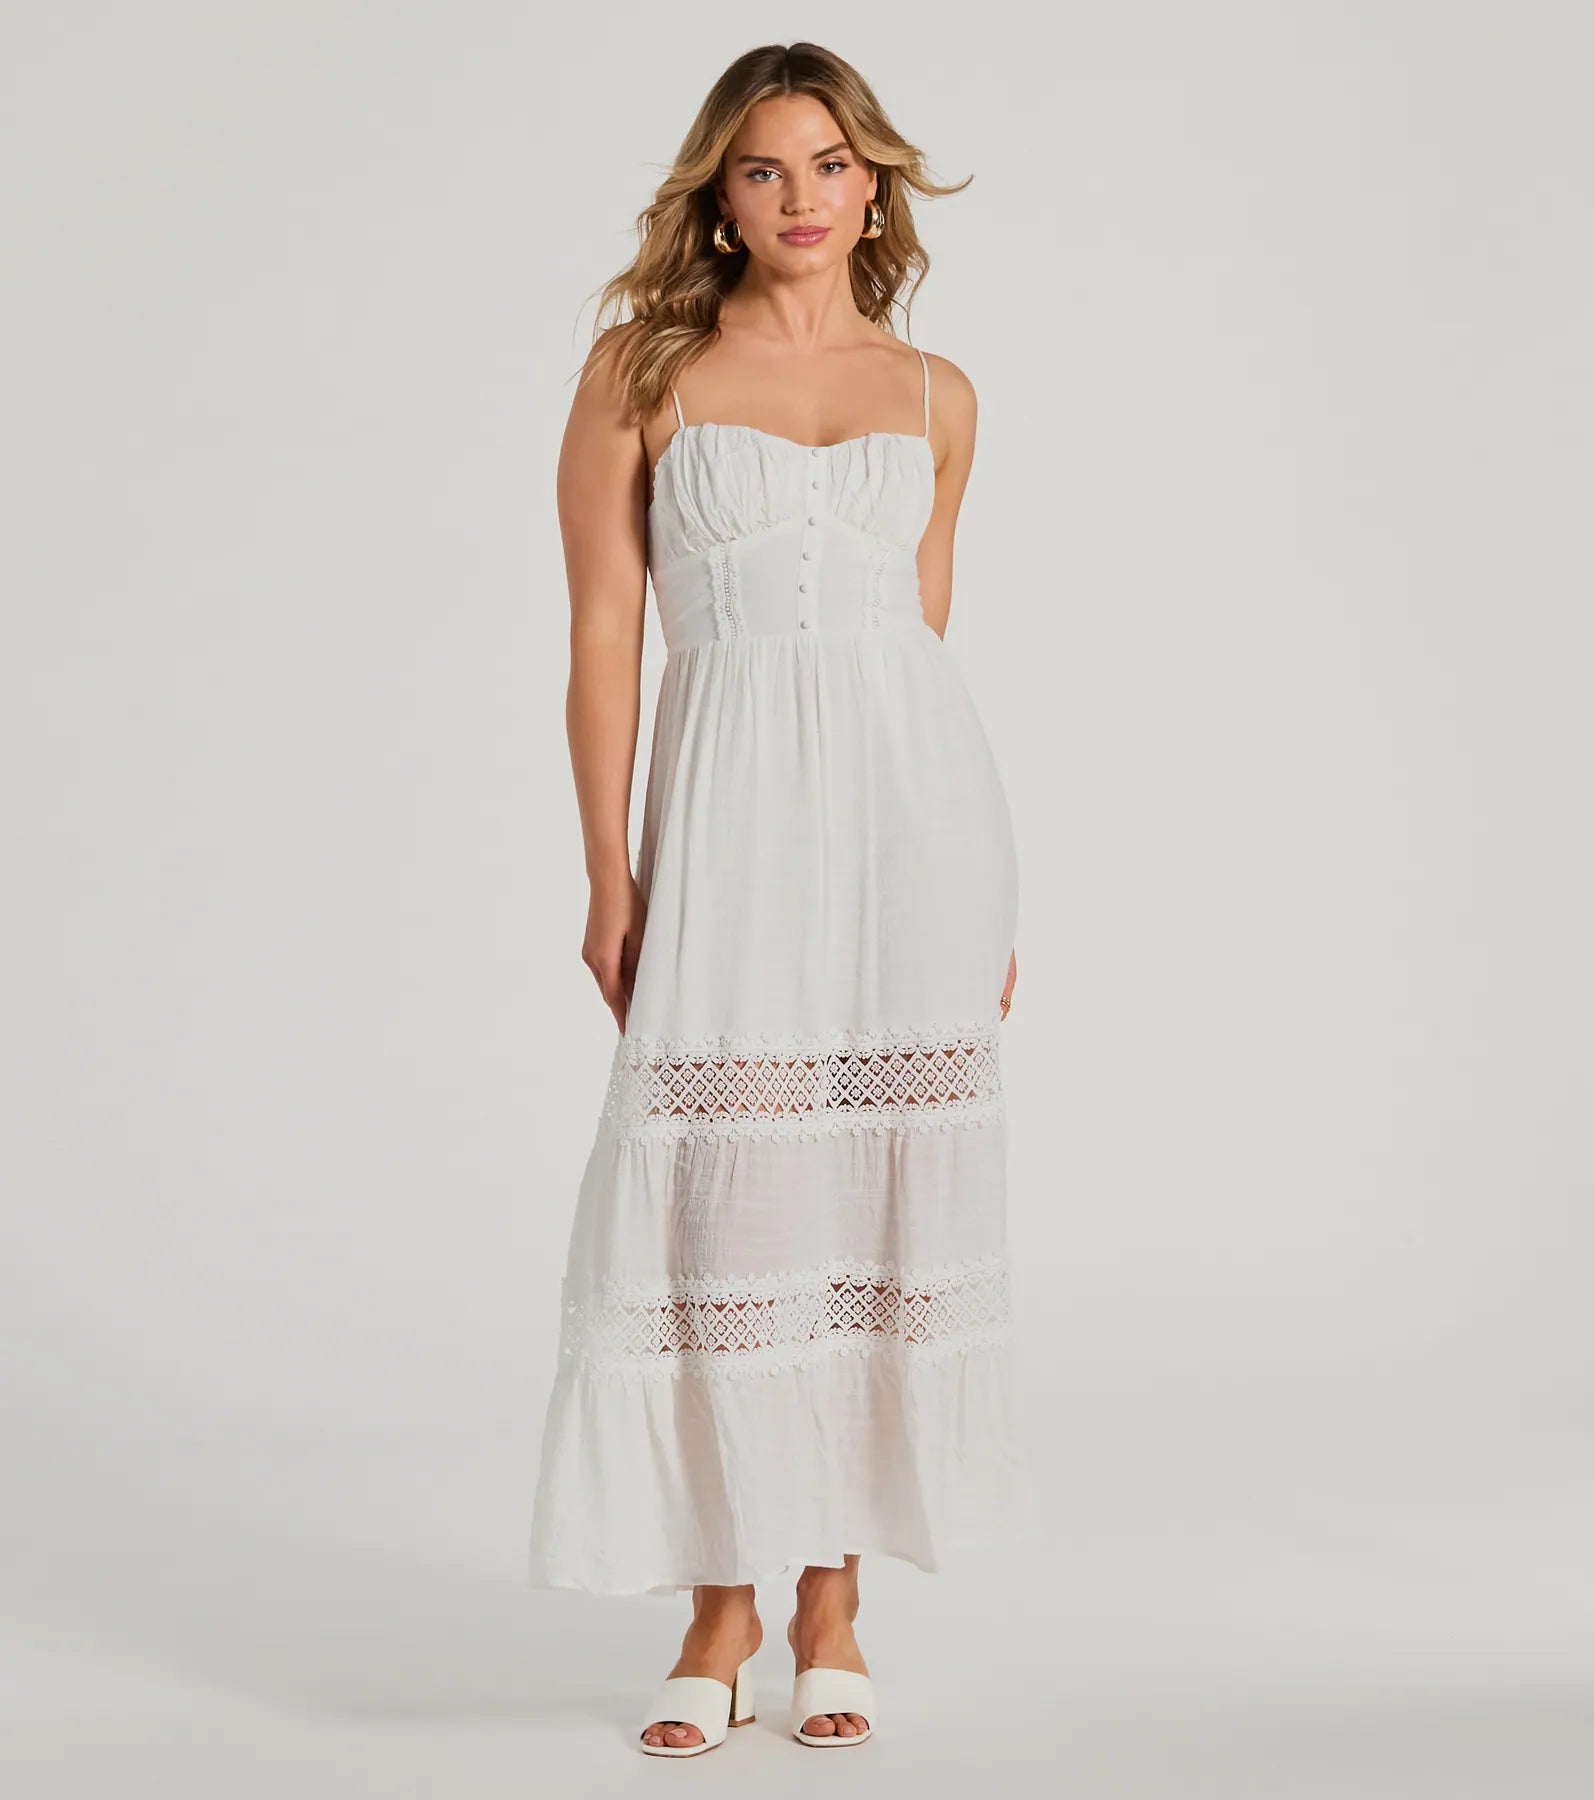 Flowy Ruched Sheer Lace Trim Sweetheart Sleeveless Spaghetti Strap Skater Dress